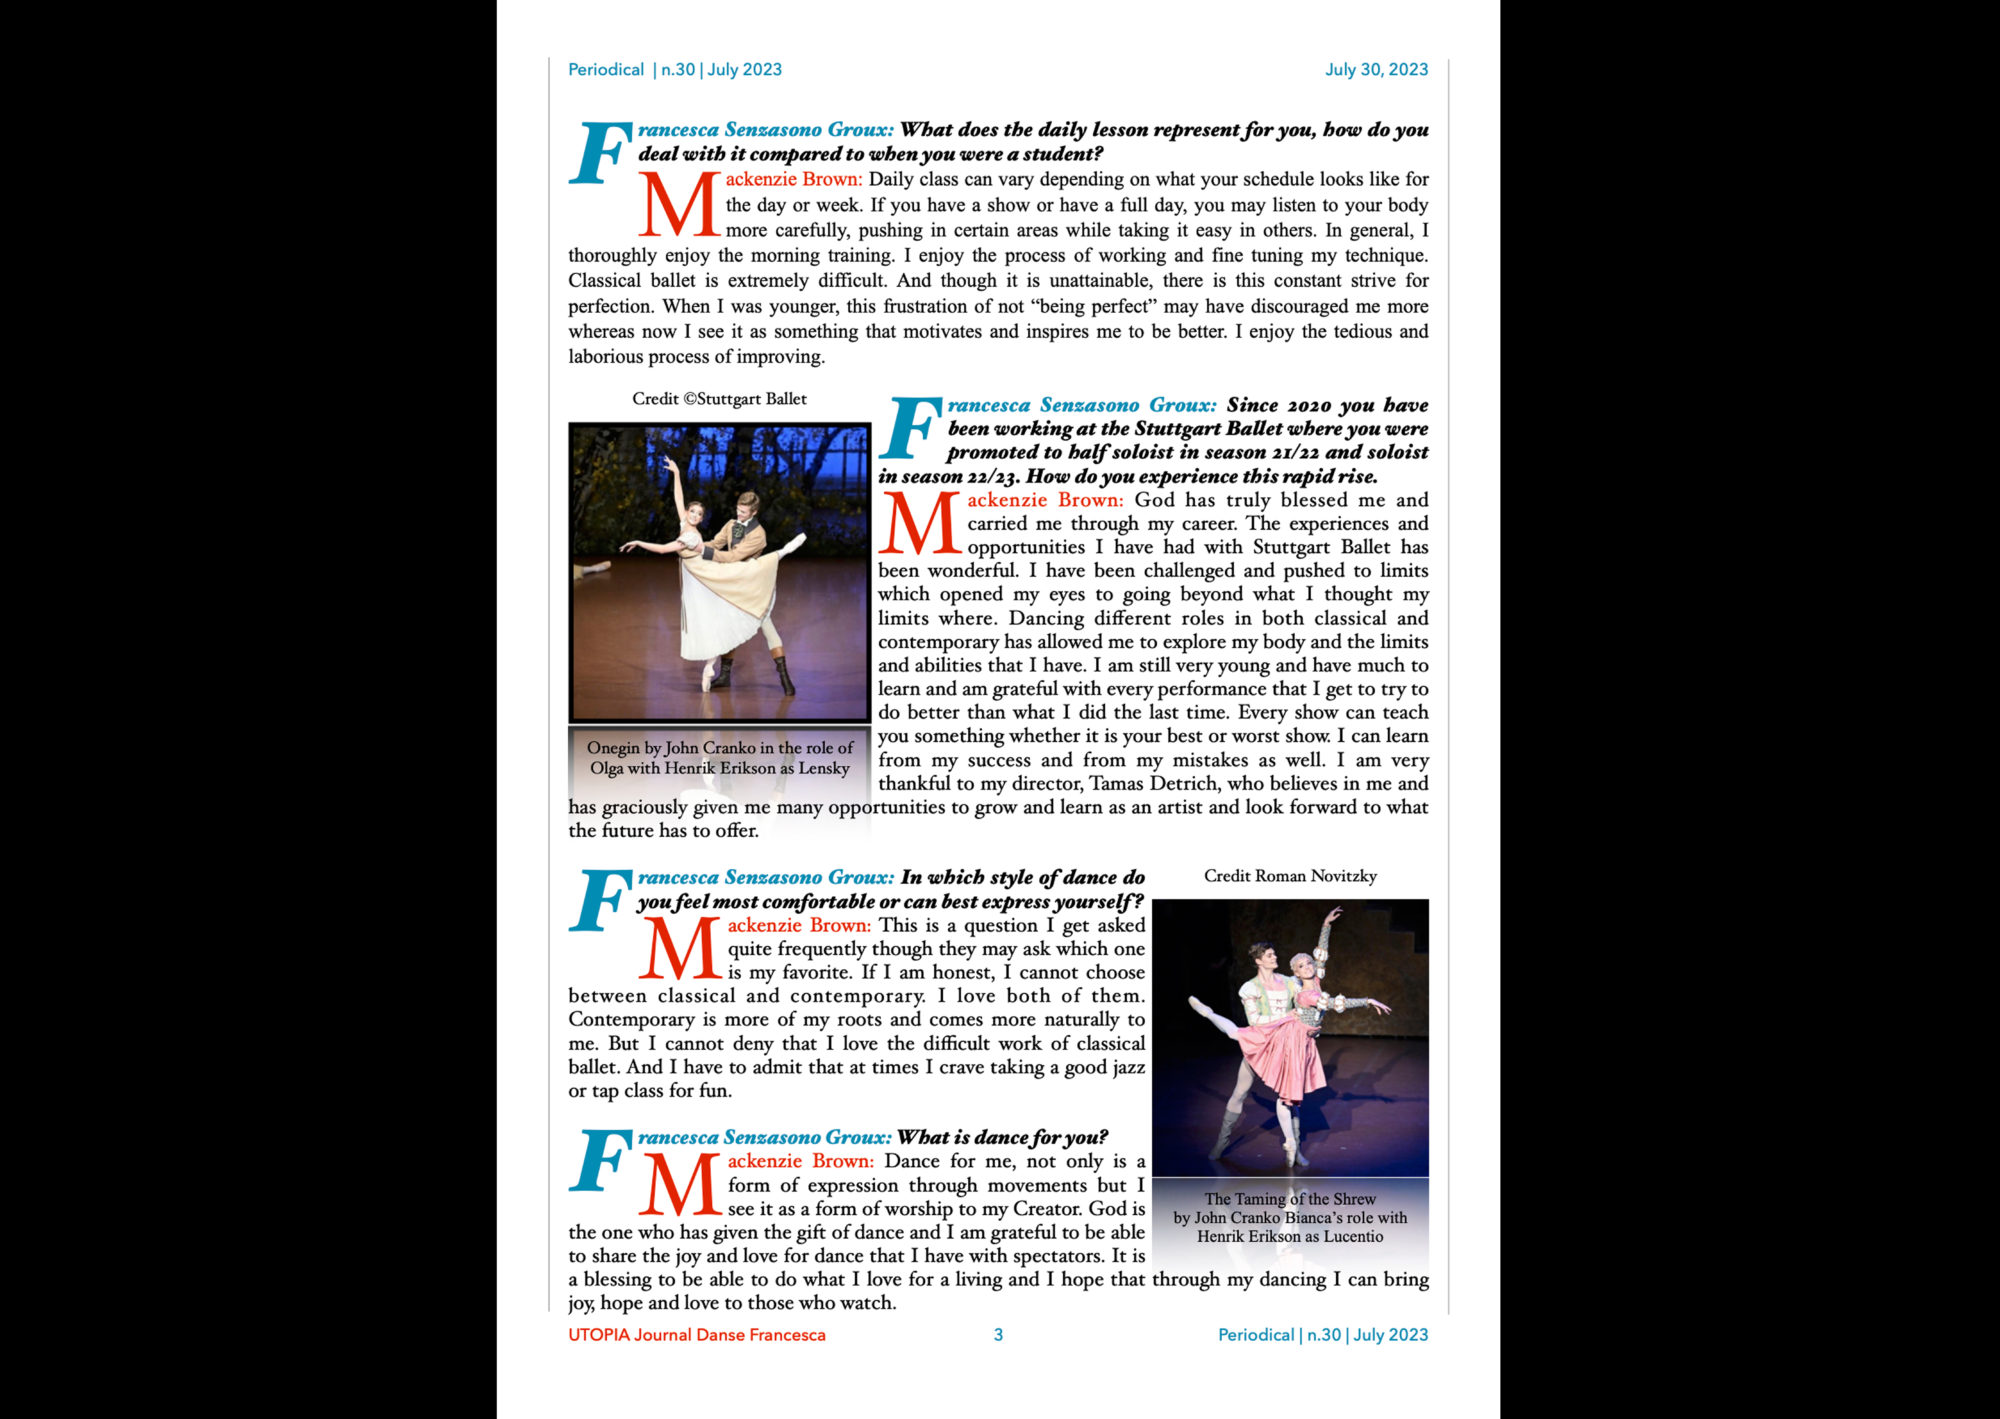 ©UTOPIA Journal Danse Francesca Periodical n.30 July 30, 2023 page 3